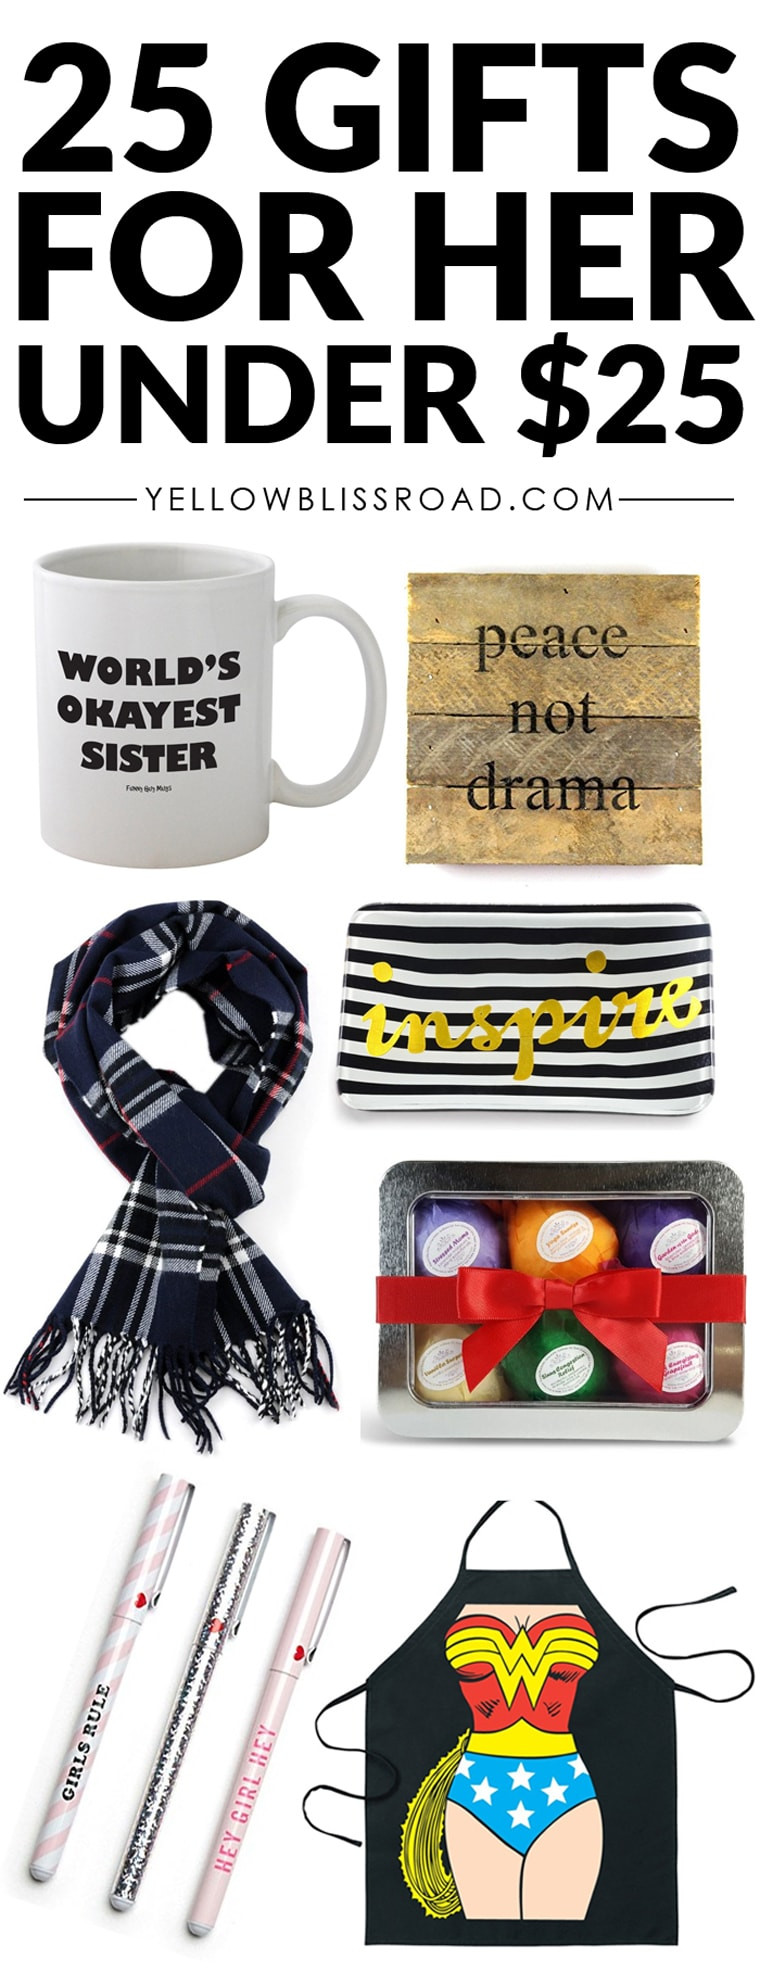 Holiday Gift Ideas Under 25
 Christmas Gift Ideas for Her Gifts for Women